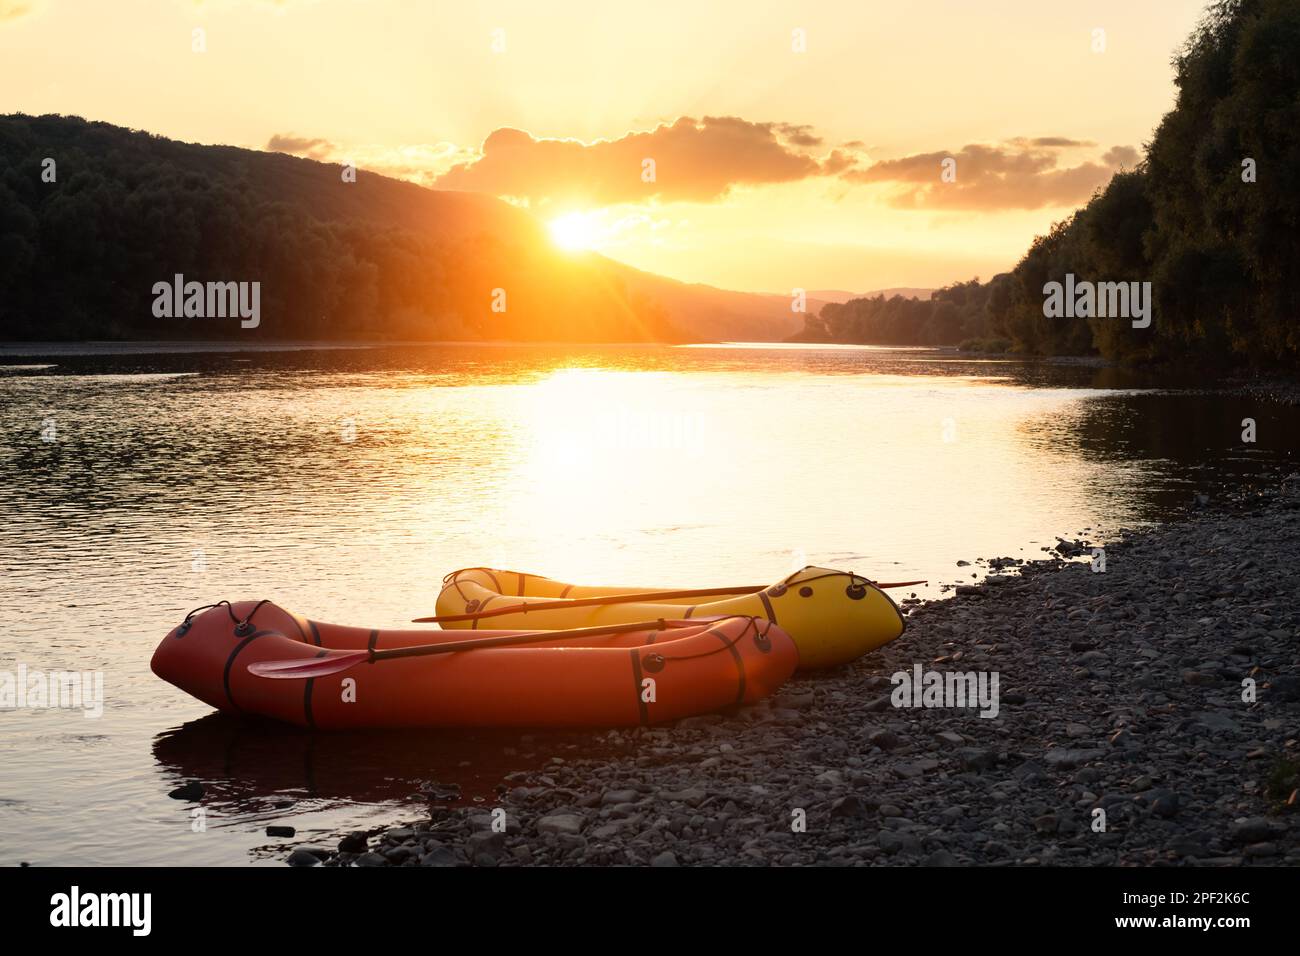 Beautiful landscape with two packrafts rubber boats on Dnister river. Incredible golden backlight from sunset sun. Packrafting and active lifestile concept Stock Photo